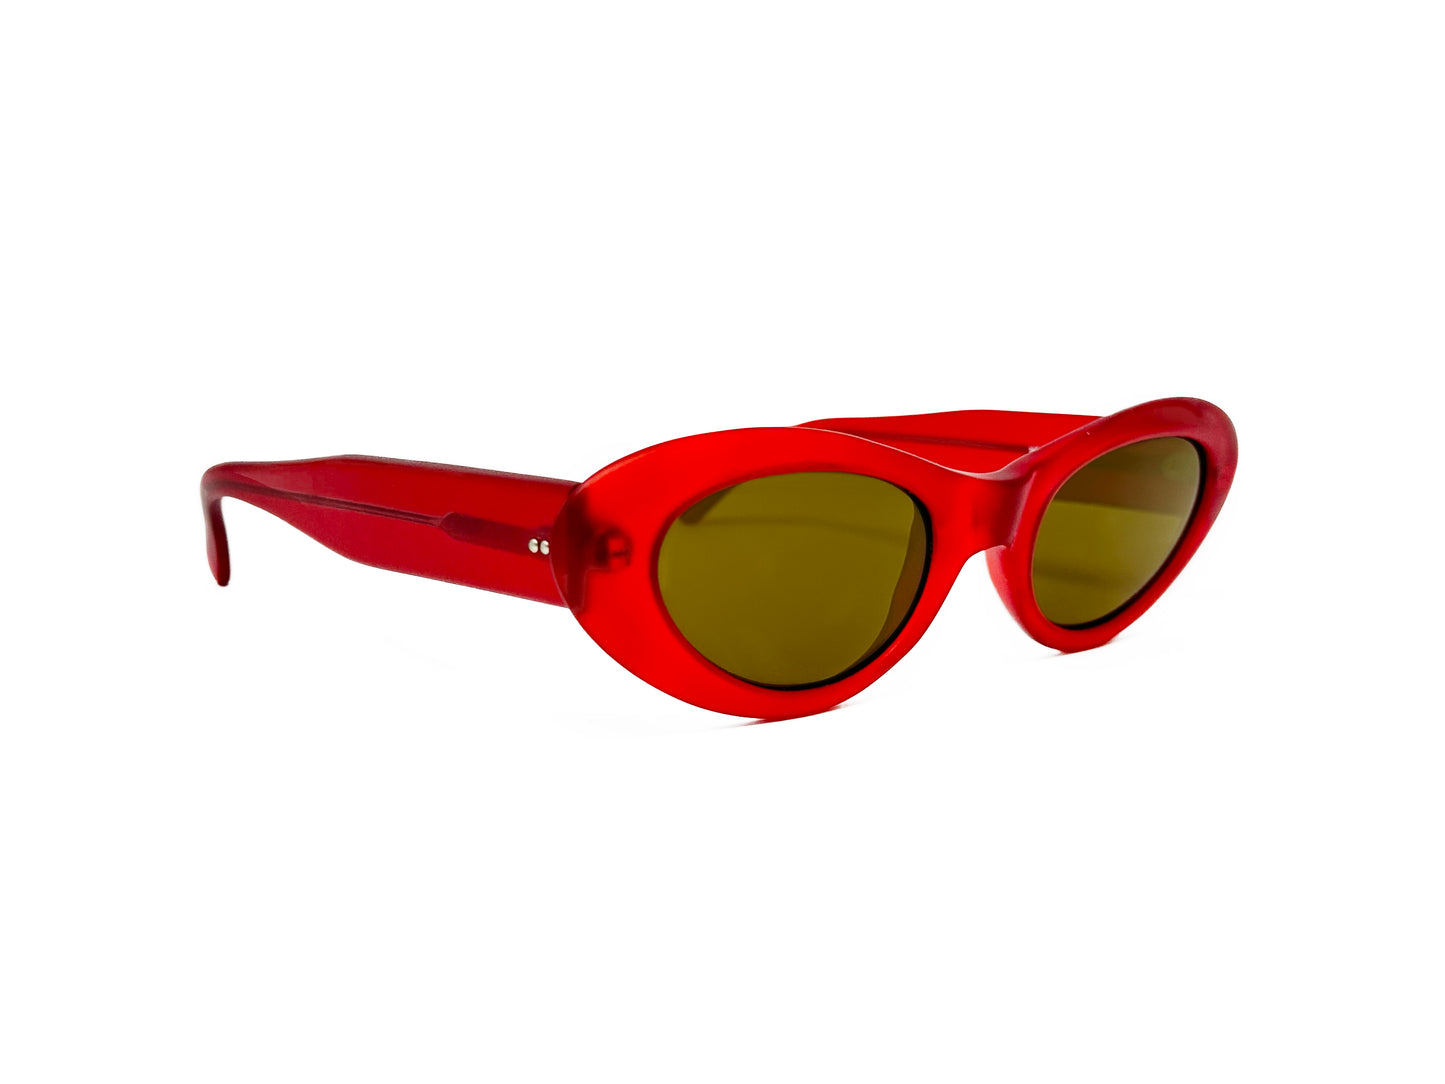 Kador oval, cat-eye, acetate sunglasses. Model: 3. Color: 1453- Red with green lenses. Side view.